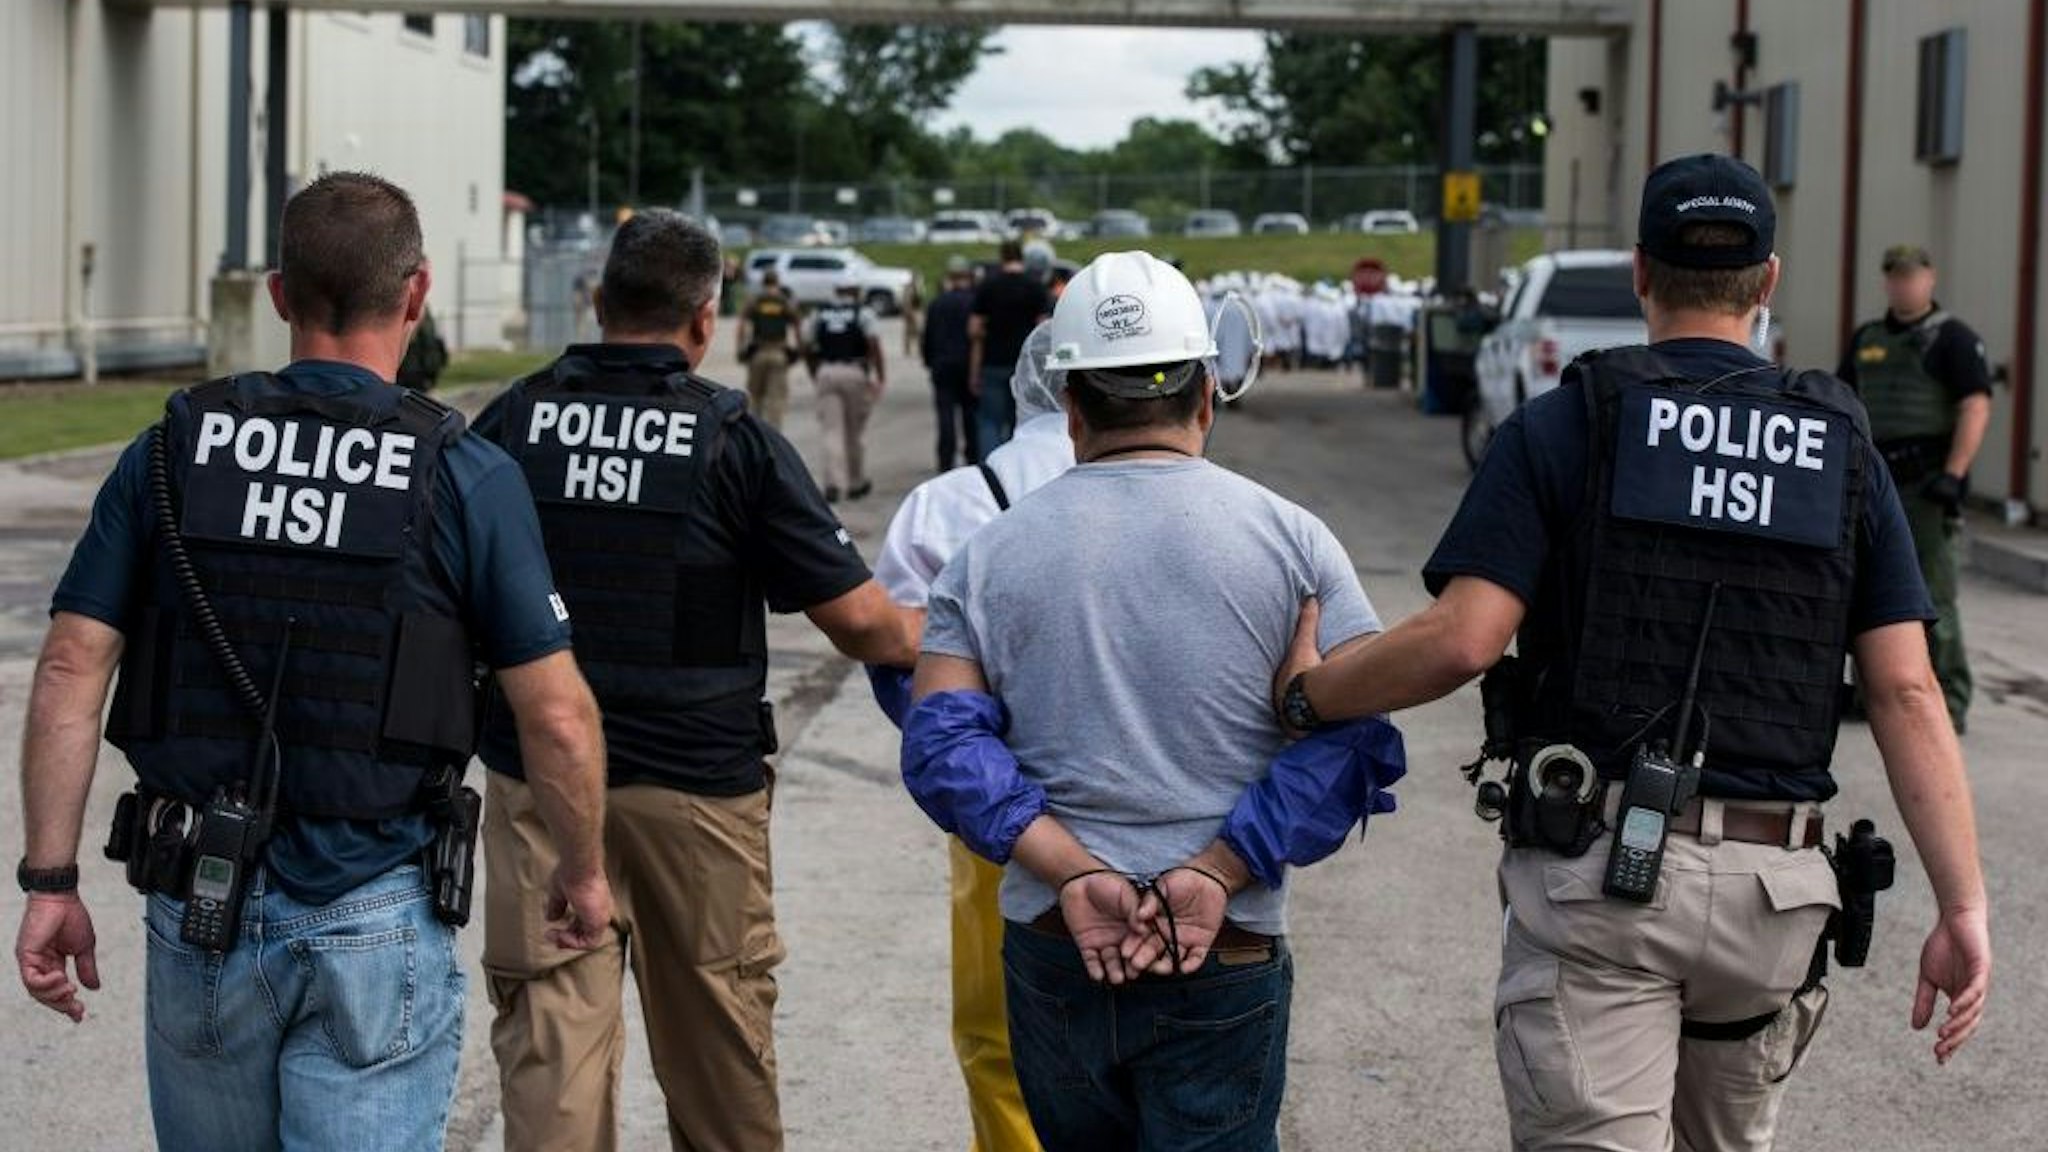 US Immigration and Customs Enforcement's (ICE) Homeland Security Investigations (HSI) special agents arrested alleged immigration violators at Fresh Mark, Salem, June 19, 2018. Image courtesy ICE ICE / U.S. Immigration and Customs Enforcement. (Photo by Smith Collection/Gado/Getty Images)